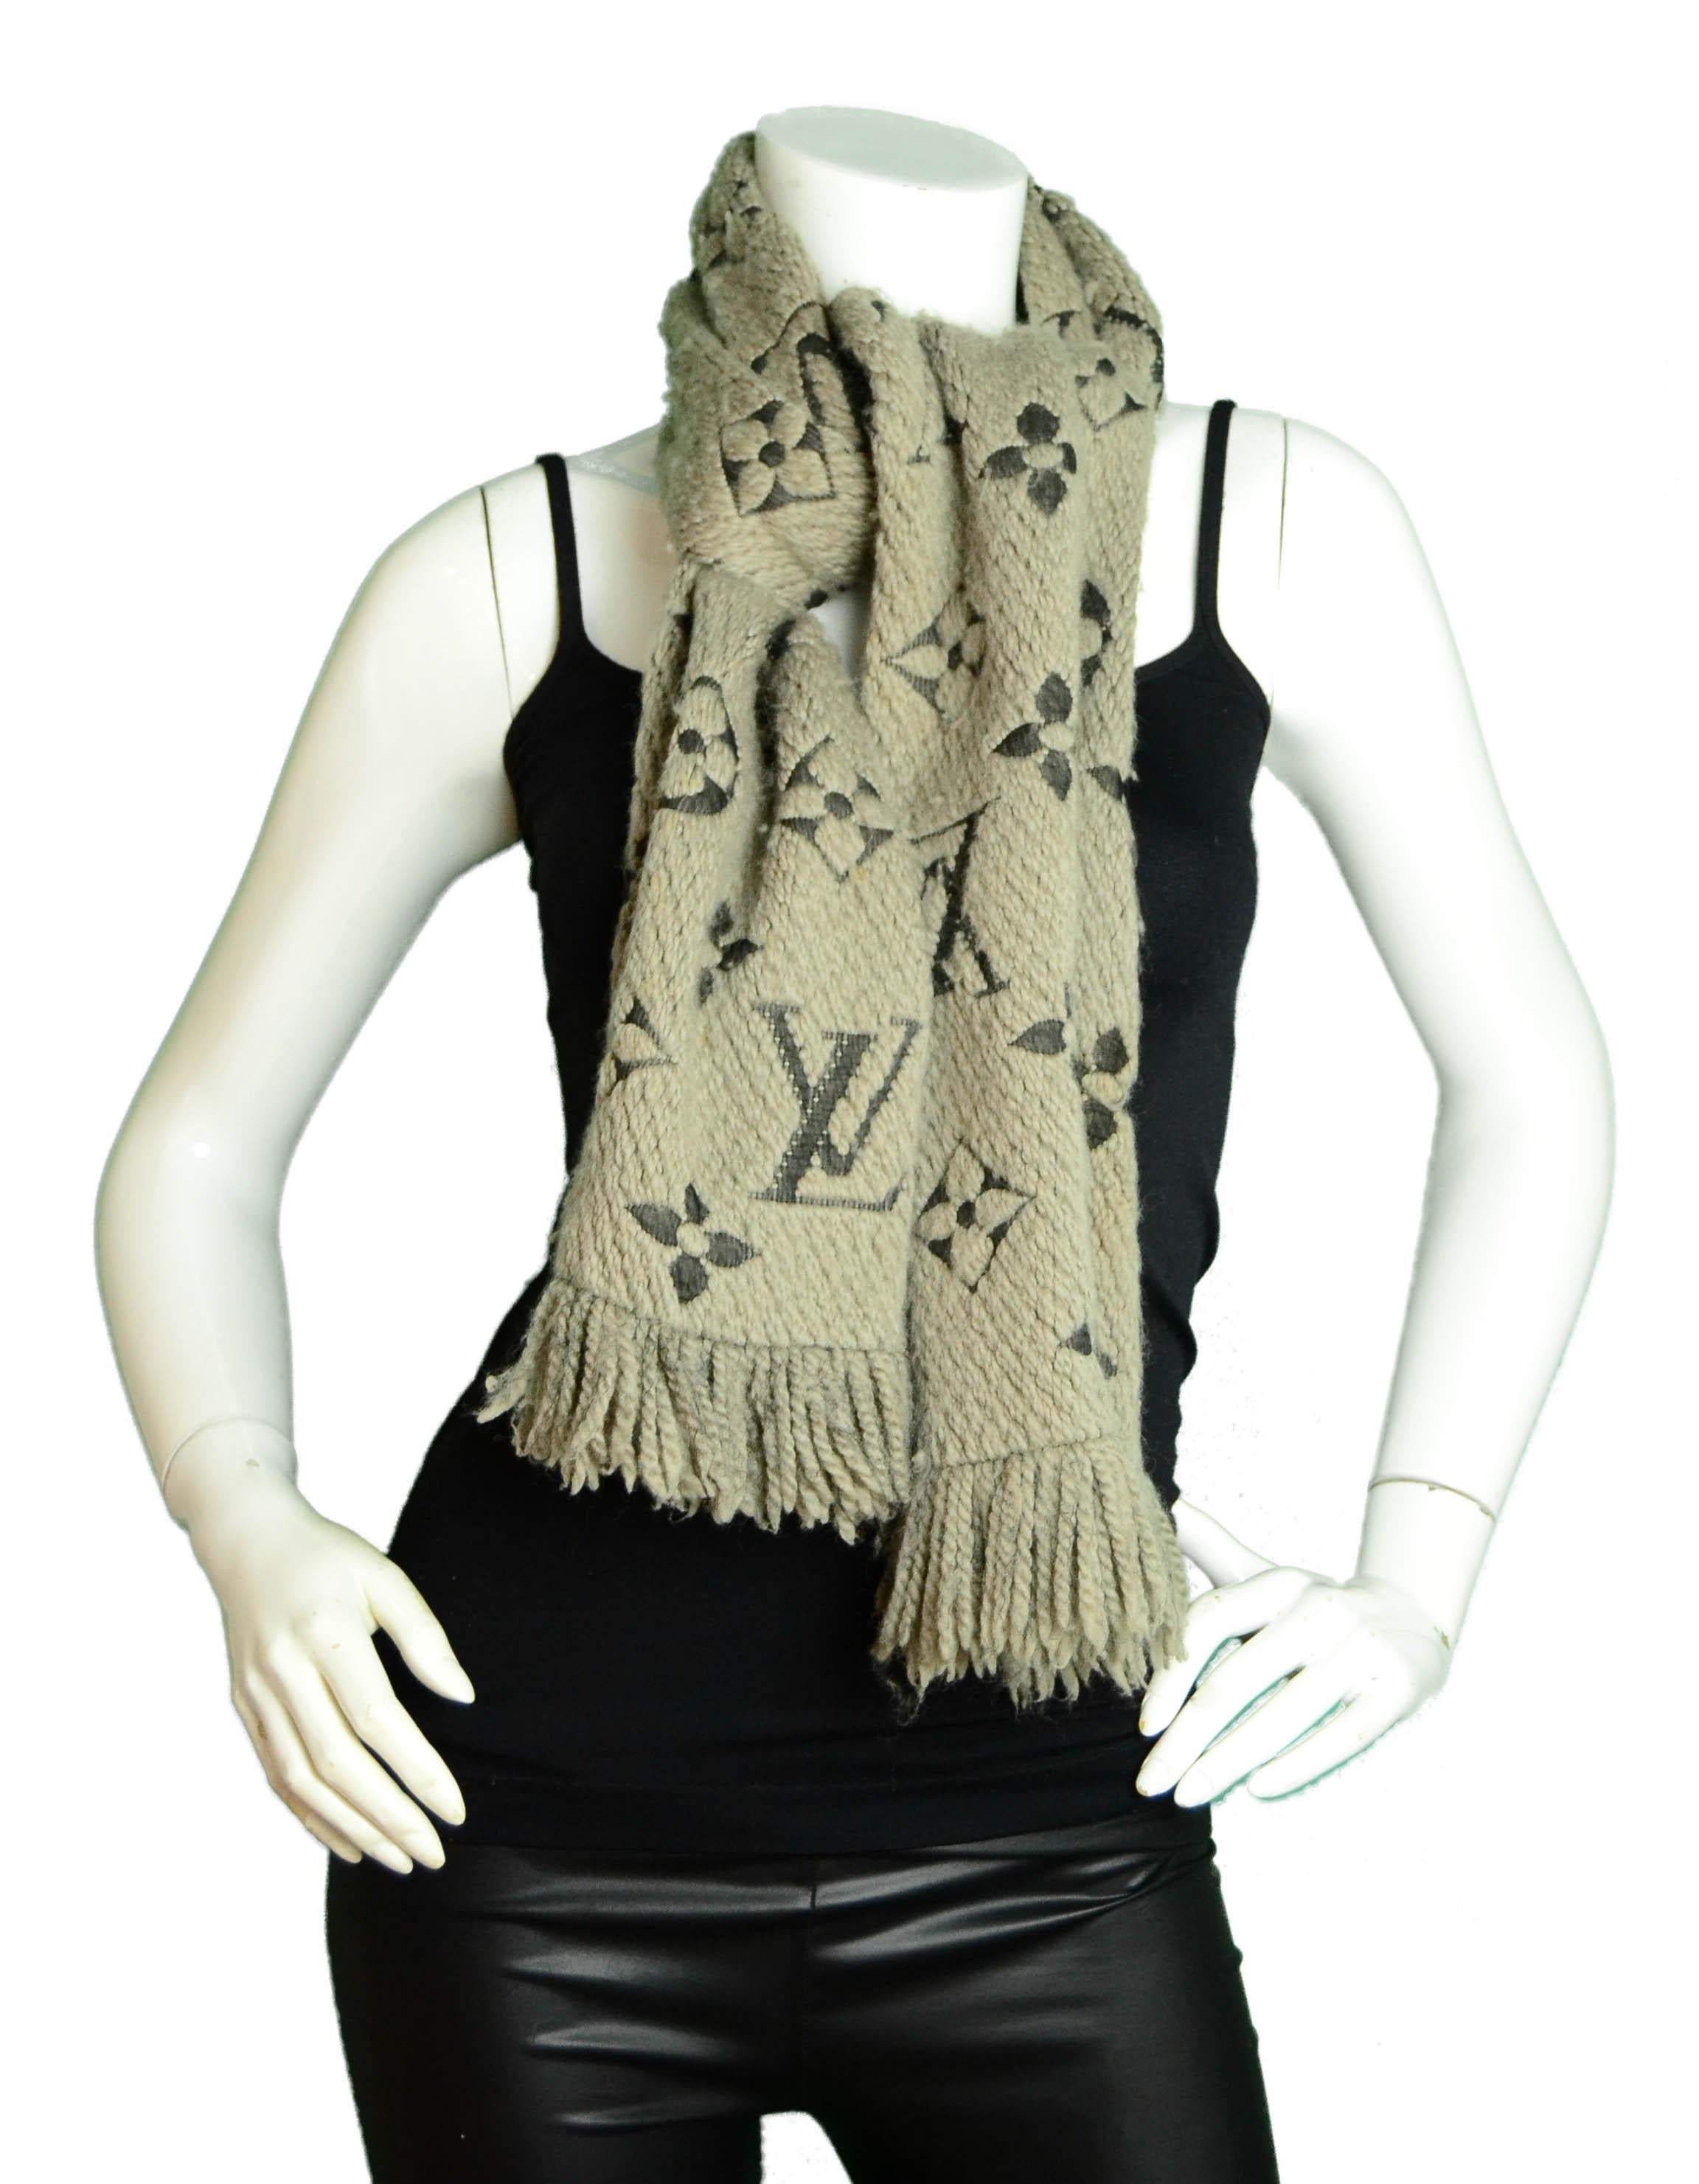 Louis Vuitton Logomania Wool Scarf

Made In: Italy
Color: Taupe, brown
Materials: 94% Wool, 6% Silk
Overall Condition: Good - piling throughout and small stain
Estimated Retail: $415
Measurements: 
12”W x 64”H